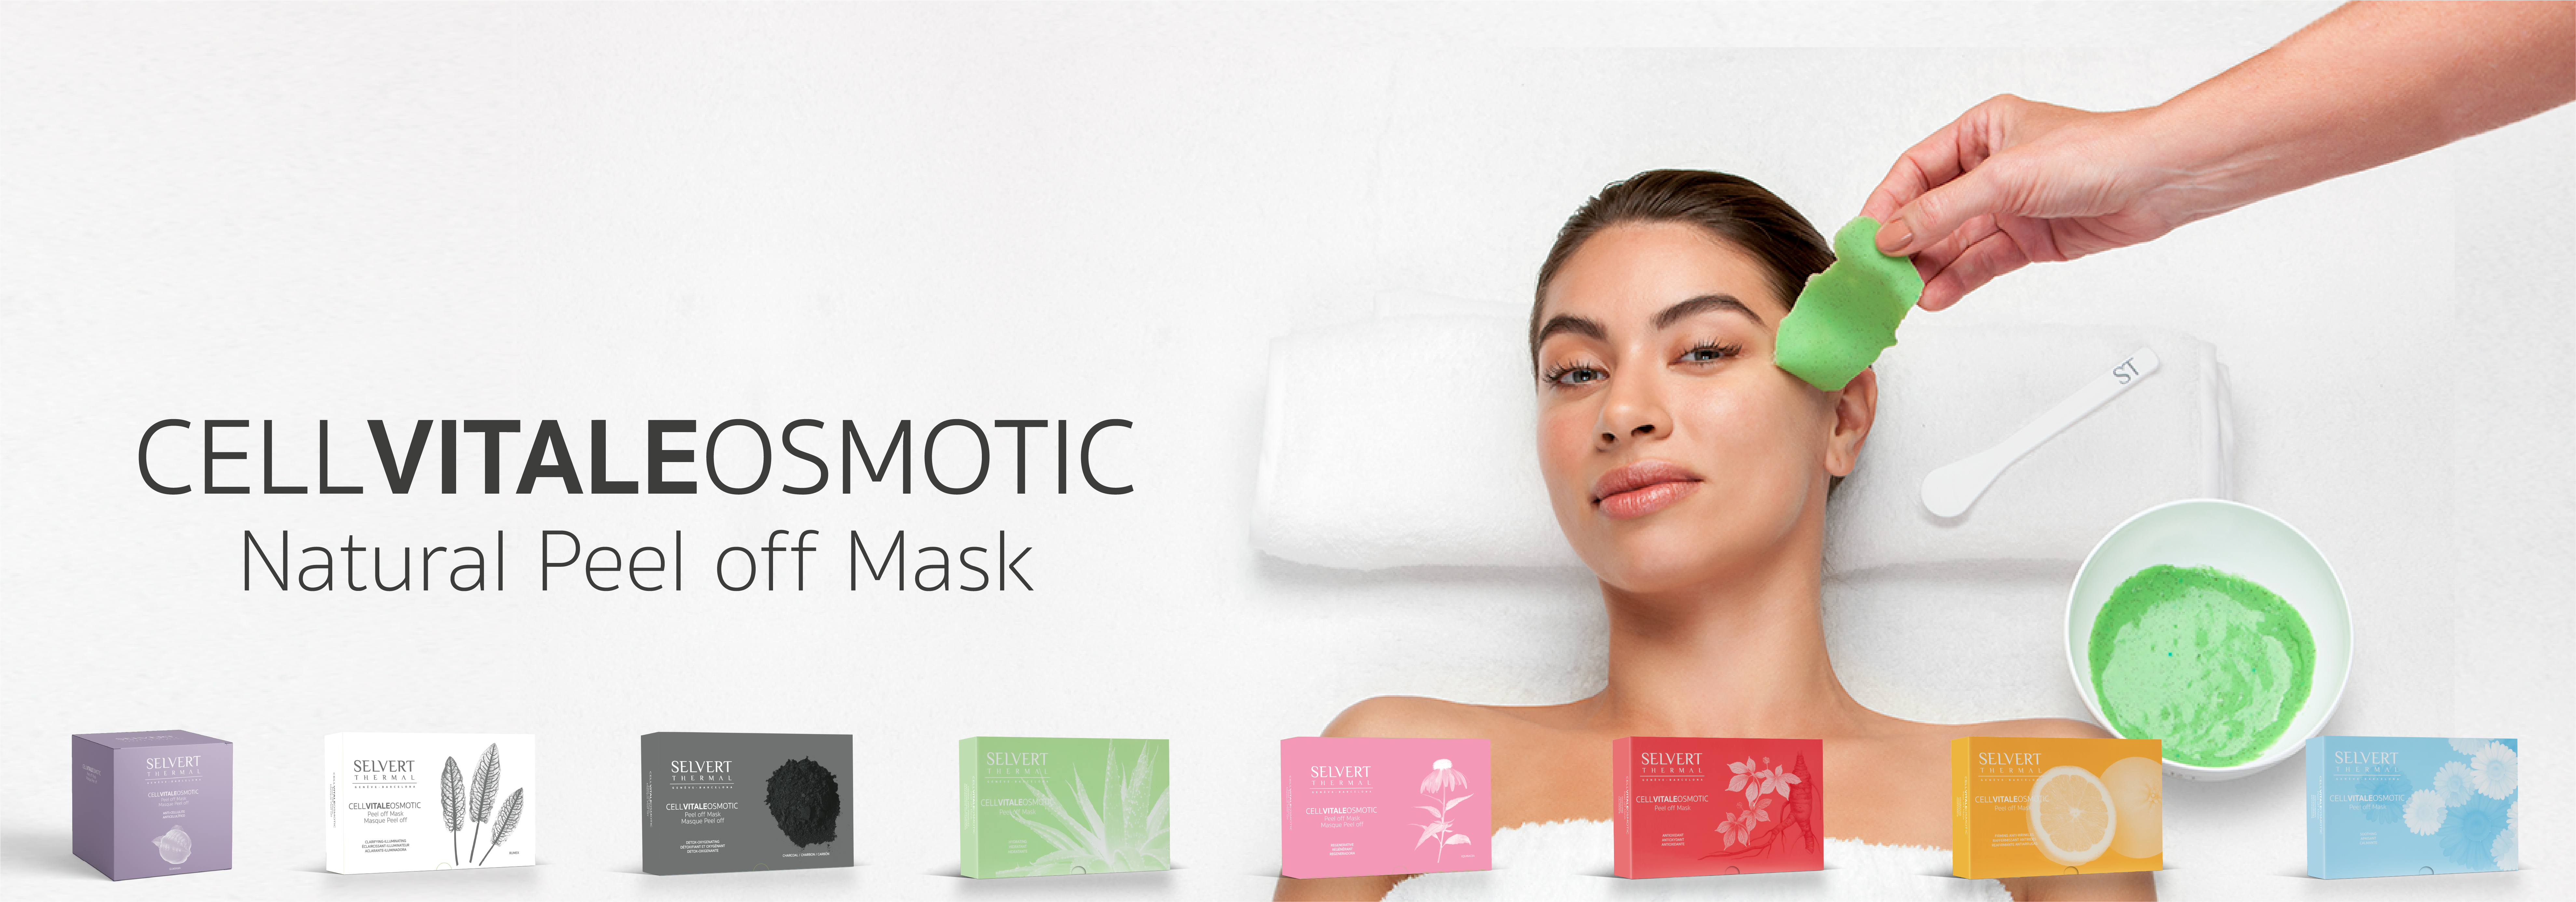 CELL VITALE OSMOTIC <h4 style="text-align: center;">OSMOTIC PEEL OFF MASKS</h4>
<p>&nbsp;</p>
<p style="text-align: justify;">Selvert Thermal has launched another important innovation for professionals with its range of 8 Peel Off Masks, all recommended for boosting the effects of the salon facial and body treatments.</p>
<p style="text-align: justify;">The Osmotic Peel Off Mask by Cell Vitale is the only mask system that contains extract of Alp Rose stem cells. This sophisticated active ingredient protects the skin regeneration systems, enabling them to function more efficiently. The skin is renewed and superior results are visible after applying any active substance.</p>
<p style="text-align: justify;">The Osmotic Peel Off Masks by Cell Vitale are suitable for use in conjunction with any professional salon treatment for a firmer, more luminous complexion.</p>
<p style="text-align: justify;">Restores natural beauty and splendour to the skin, leaving it looking its absolute best. Effectiveness of treatment with the Osmotic Peel Off Mask.</p>
<p style="text-align: justify;">Rich in plant&nbsp;extracts and <strong>with more than 95% natural&nbsp;ingredients</strong>, they peel off easily in one&nbsp;piece.</p>